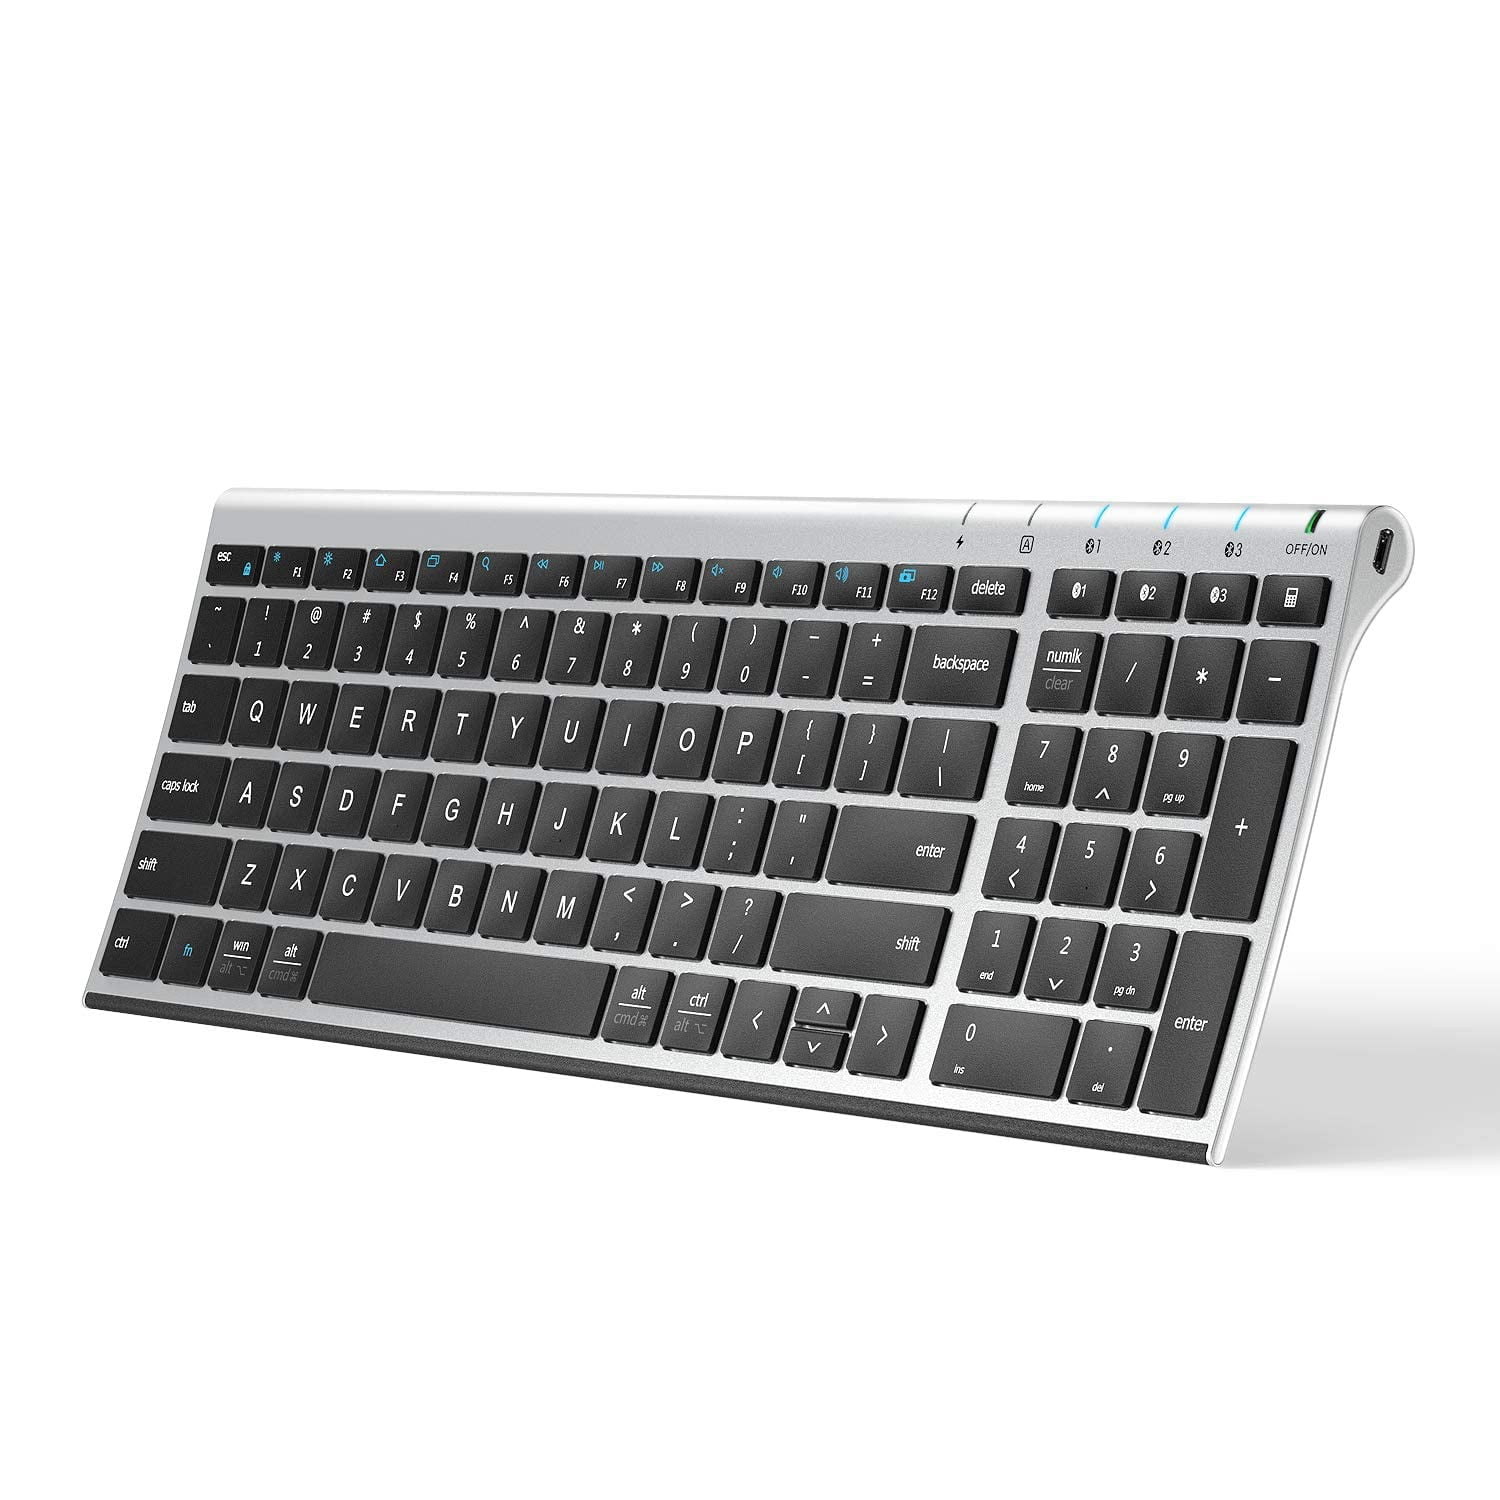 iClever BK10 Bluetooth Keyboard, Multi Device Keyboard Rechargeable Bluetooth with Number Pad Ergonomic Design Full Size Connection Keyboard iPad, iPhone, Mac, iOS, Android, Windows - Walmart.com